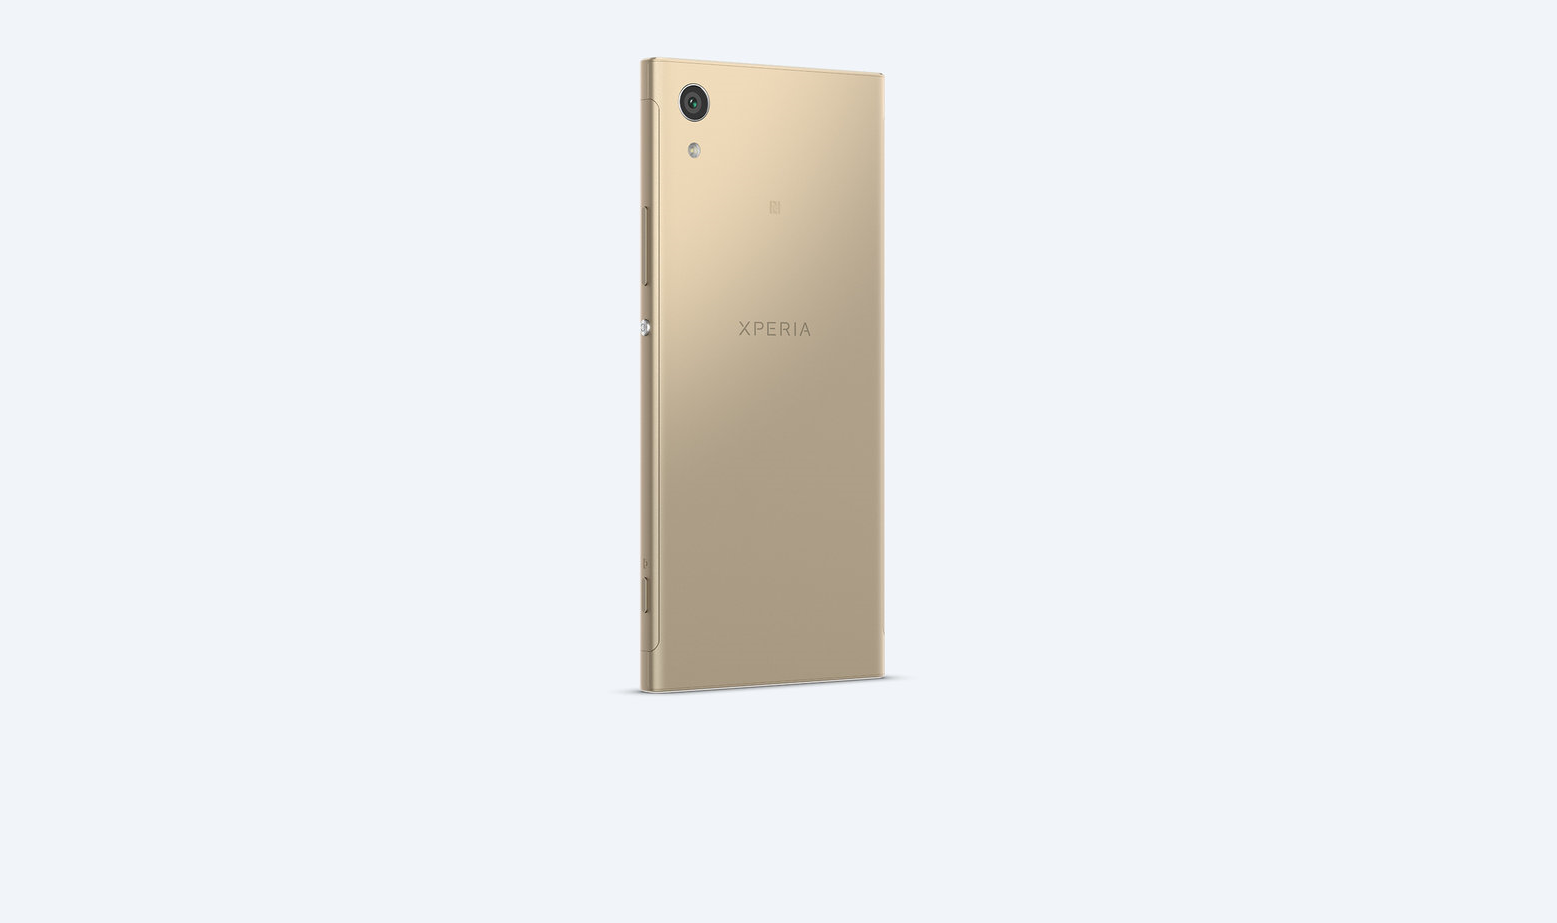 Sony Xperia XA2 Ultra Leaked Hands On Image Shows Dual Front Cameras